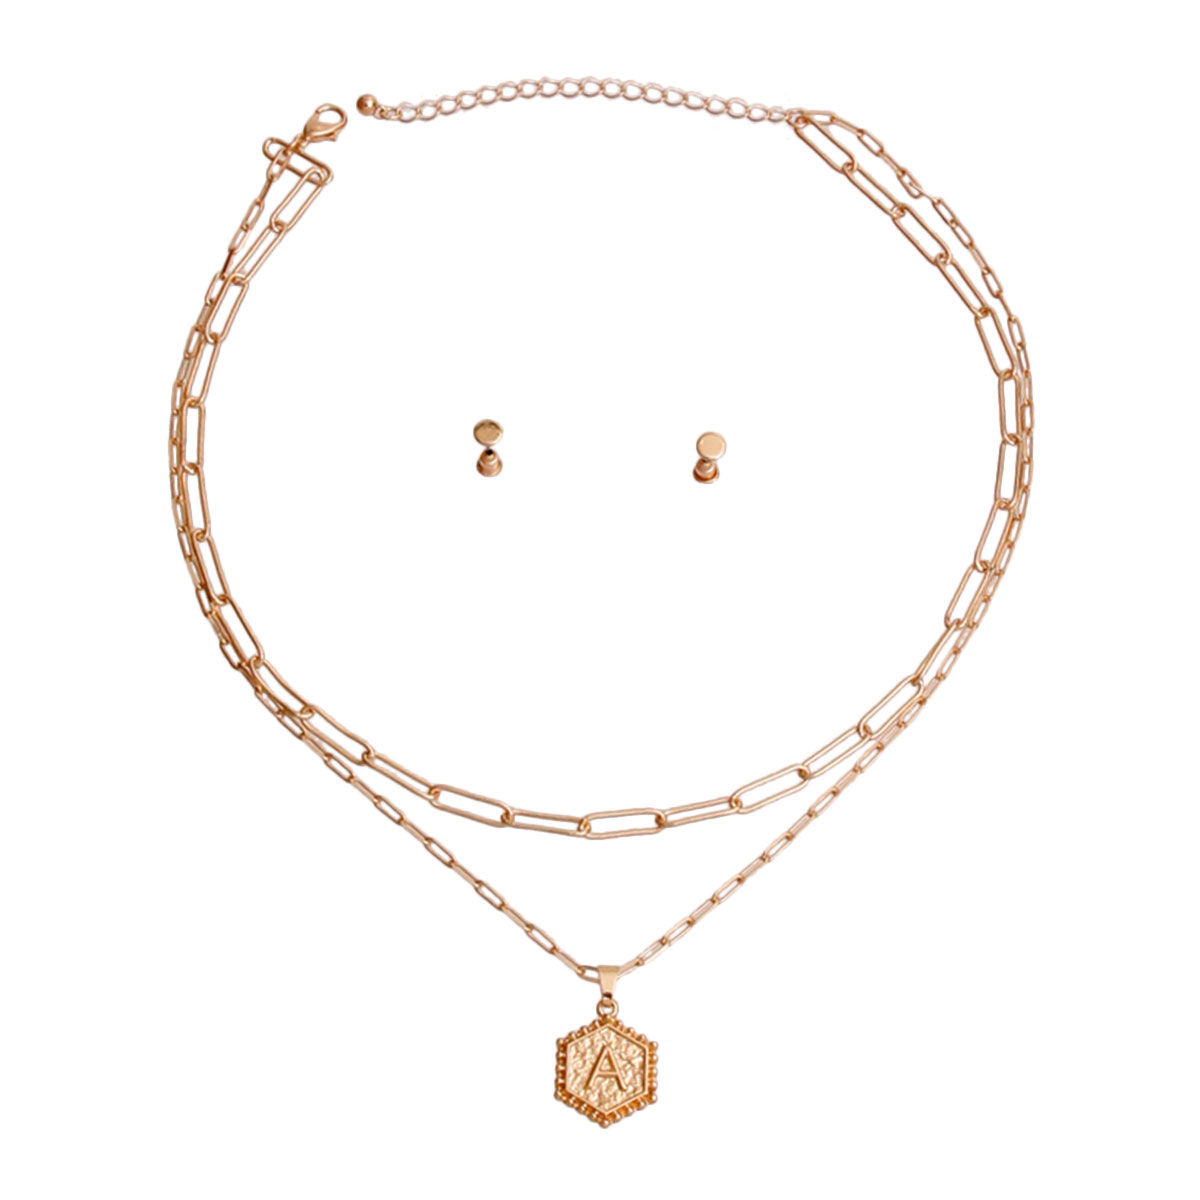 A Hexagon Initial Charm Necklace